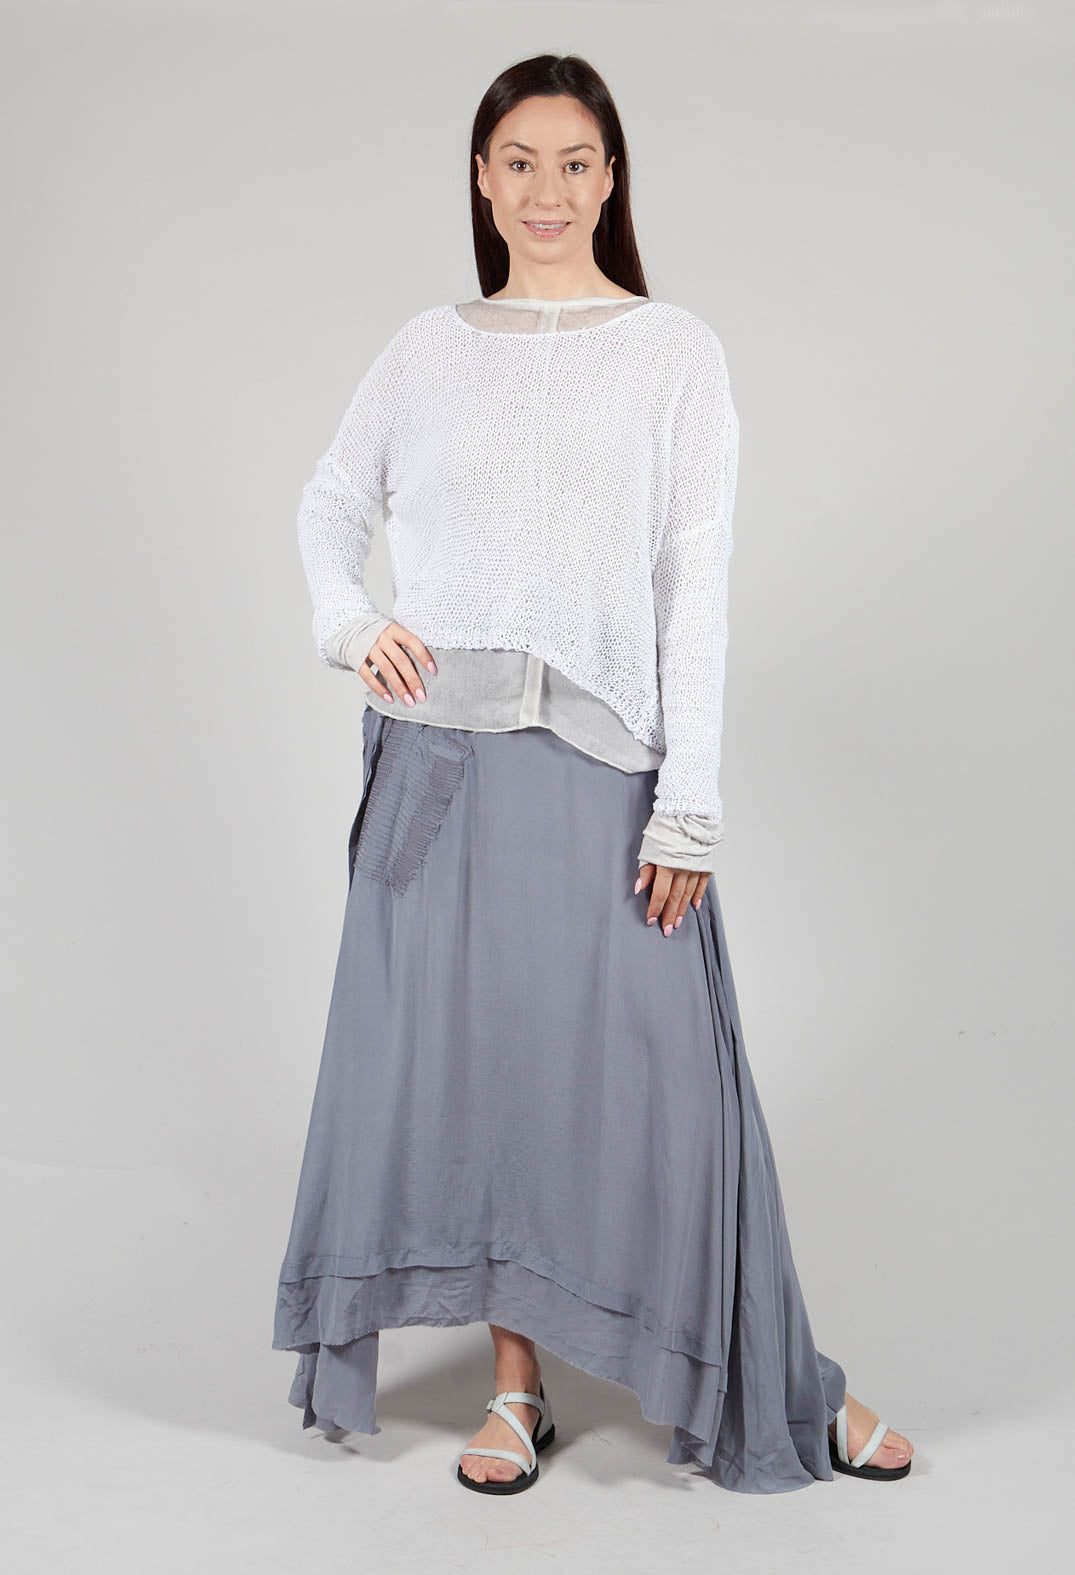 Relaxed Fit Open Weave Jumper in Off White